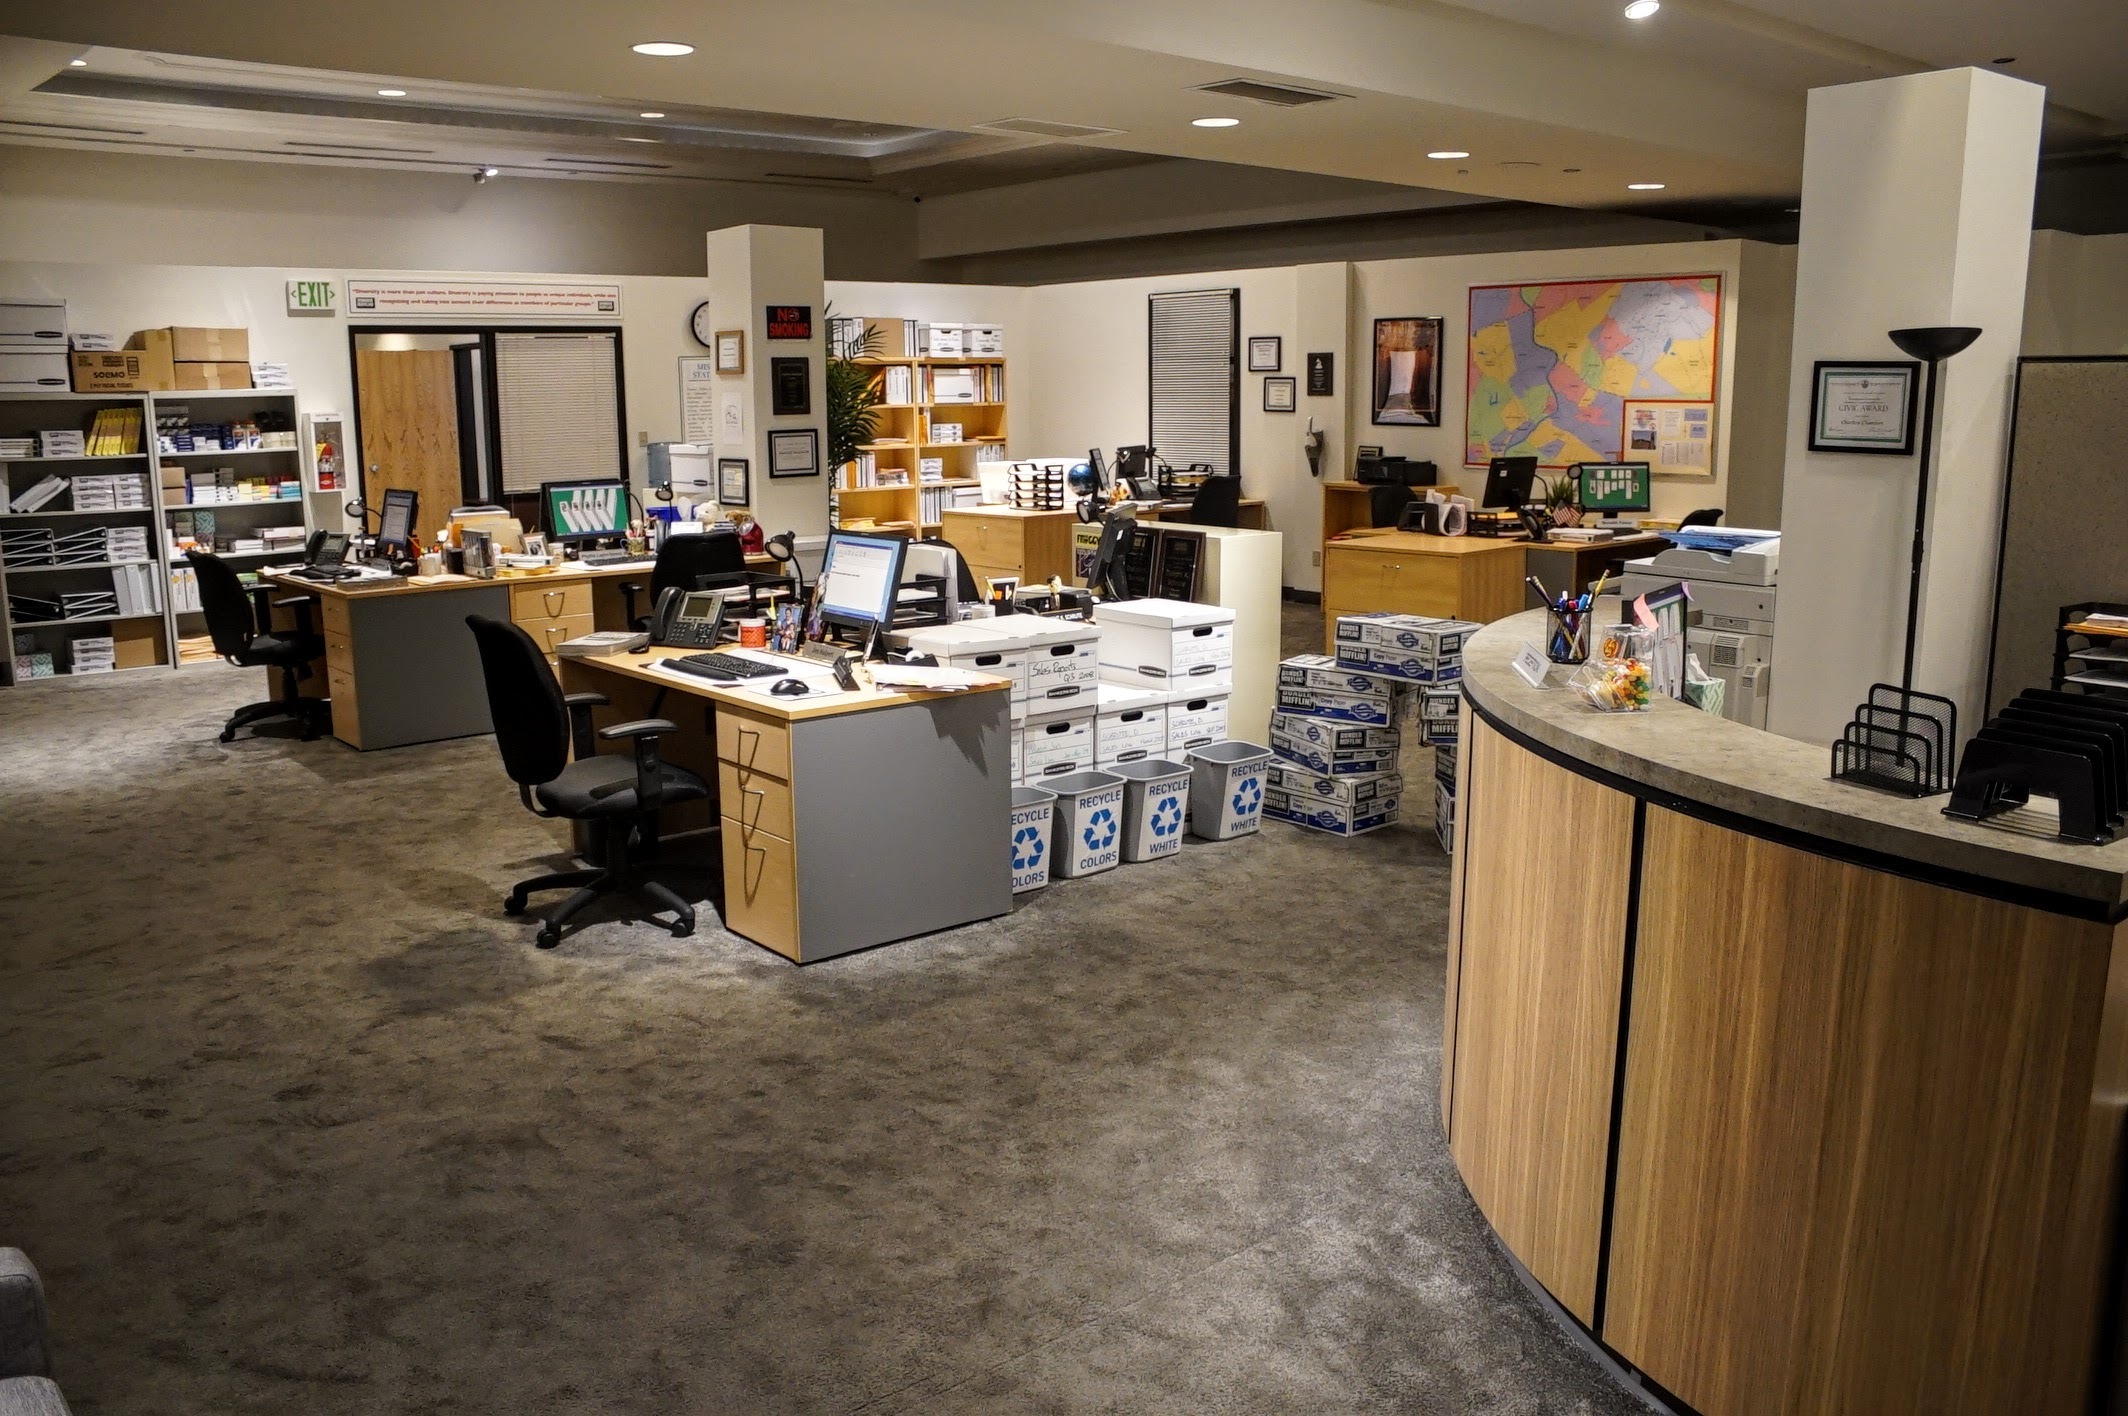 Take a look inside of “The Office Experience” popup in Chicago